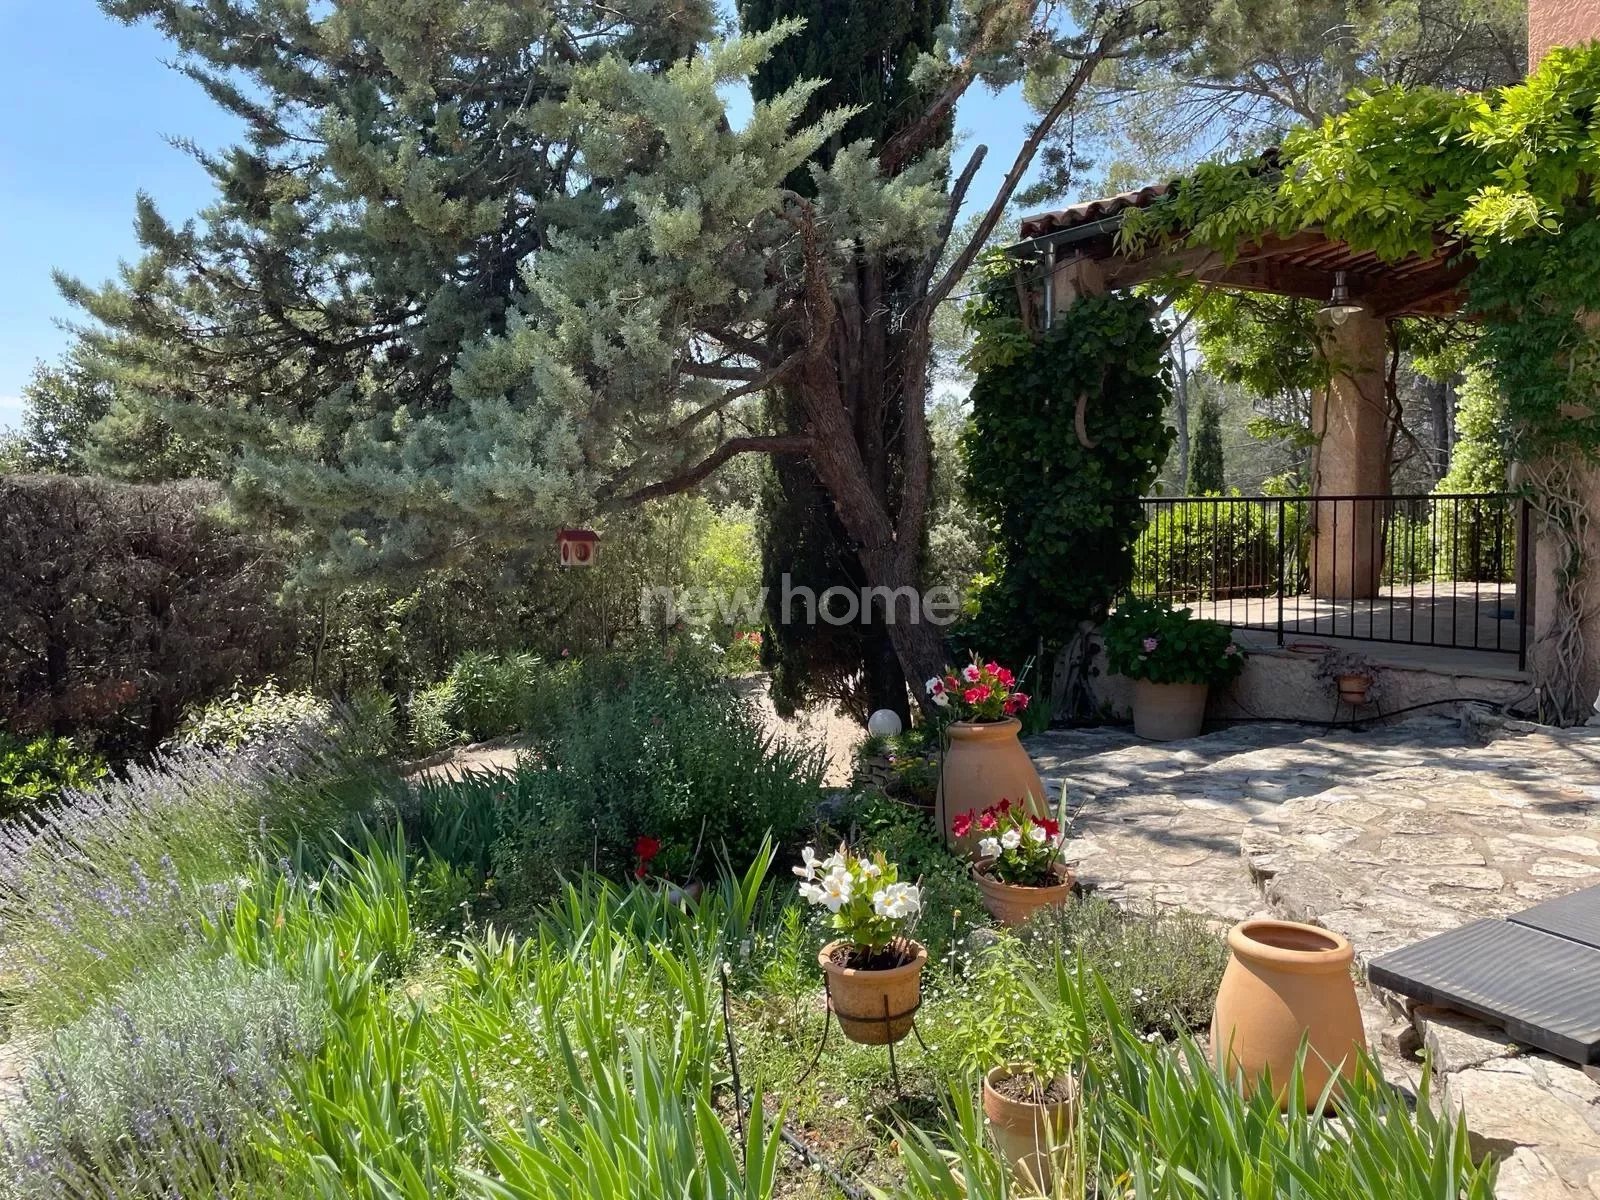 BEAUTIFUL CHARMING BASTIDE IN A RESIDENTIAL AREA